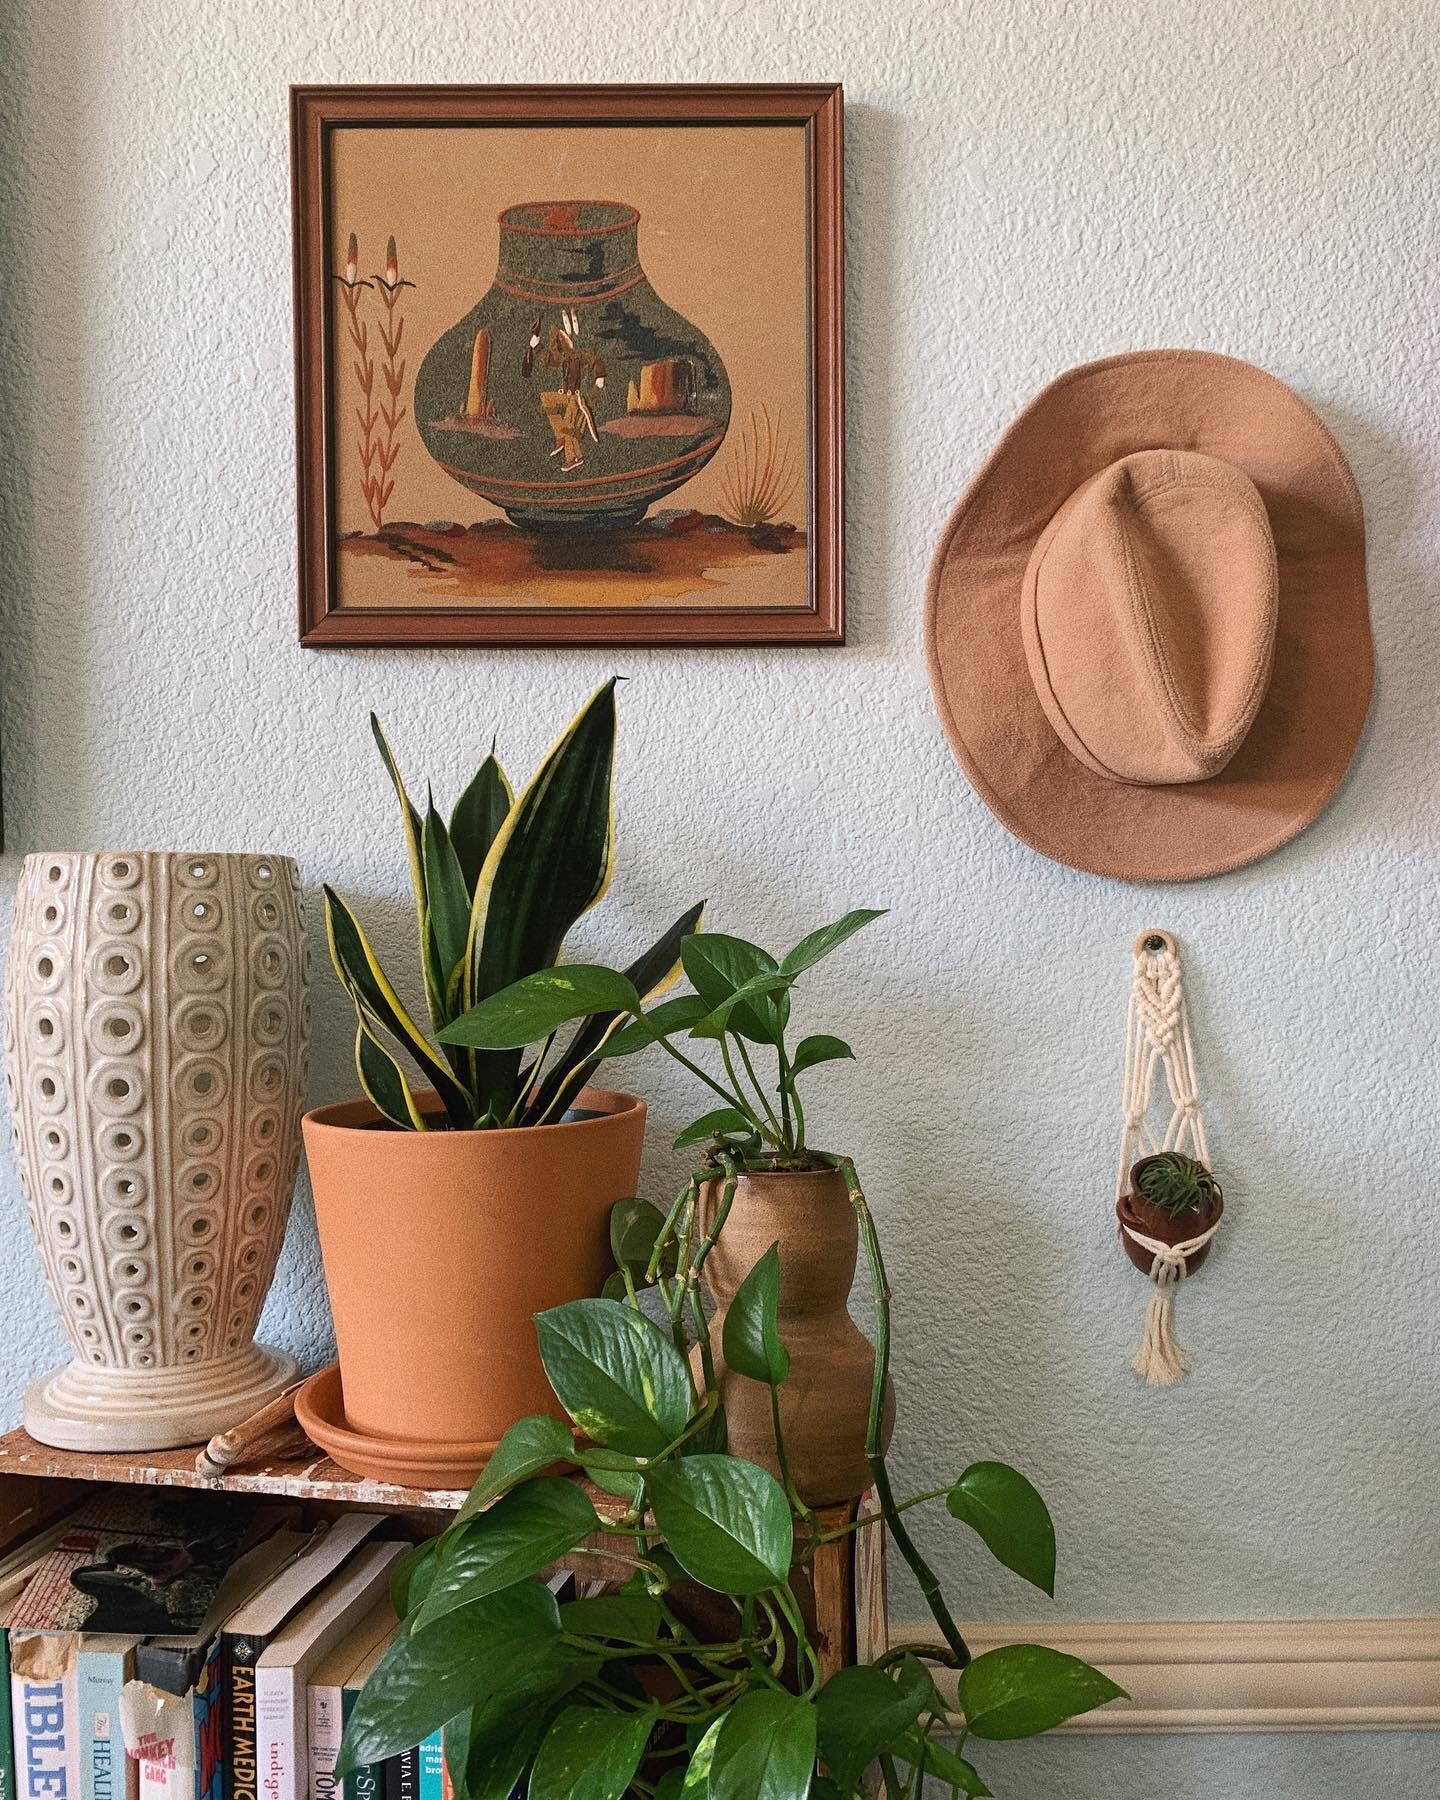 my favorite little nook in my room ☺️🕊🌵 I love to curate my space to feel warm and comfortable ~ filled with plants, art, books and small musings that bring me joy. Truthfully, I don&rsquo;t keep many of the pieces I make, I usually only keep thing